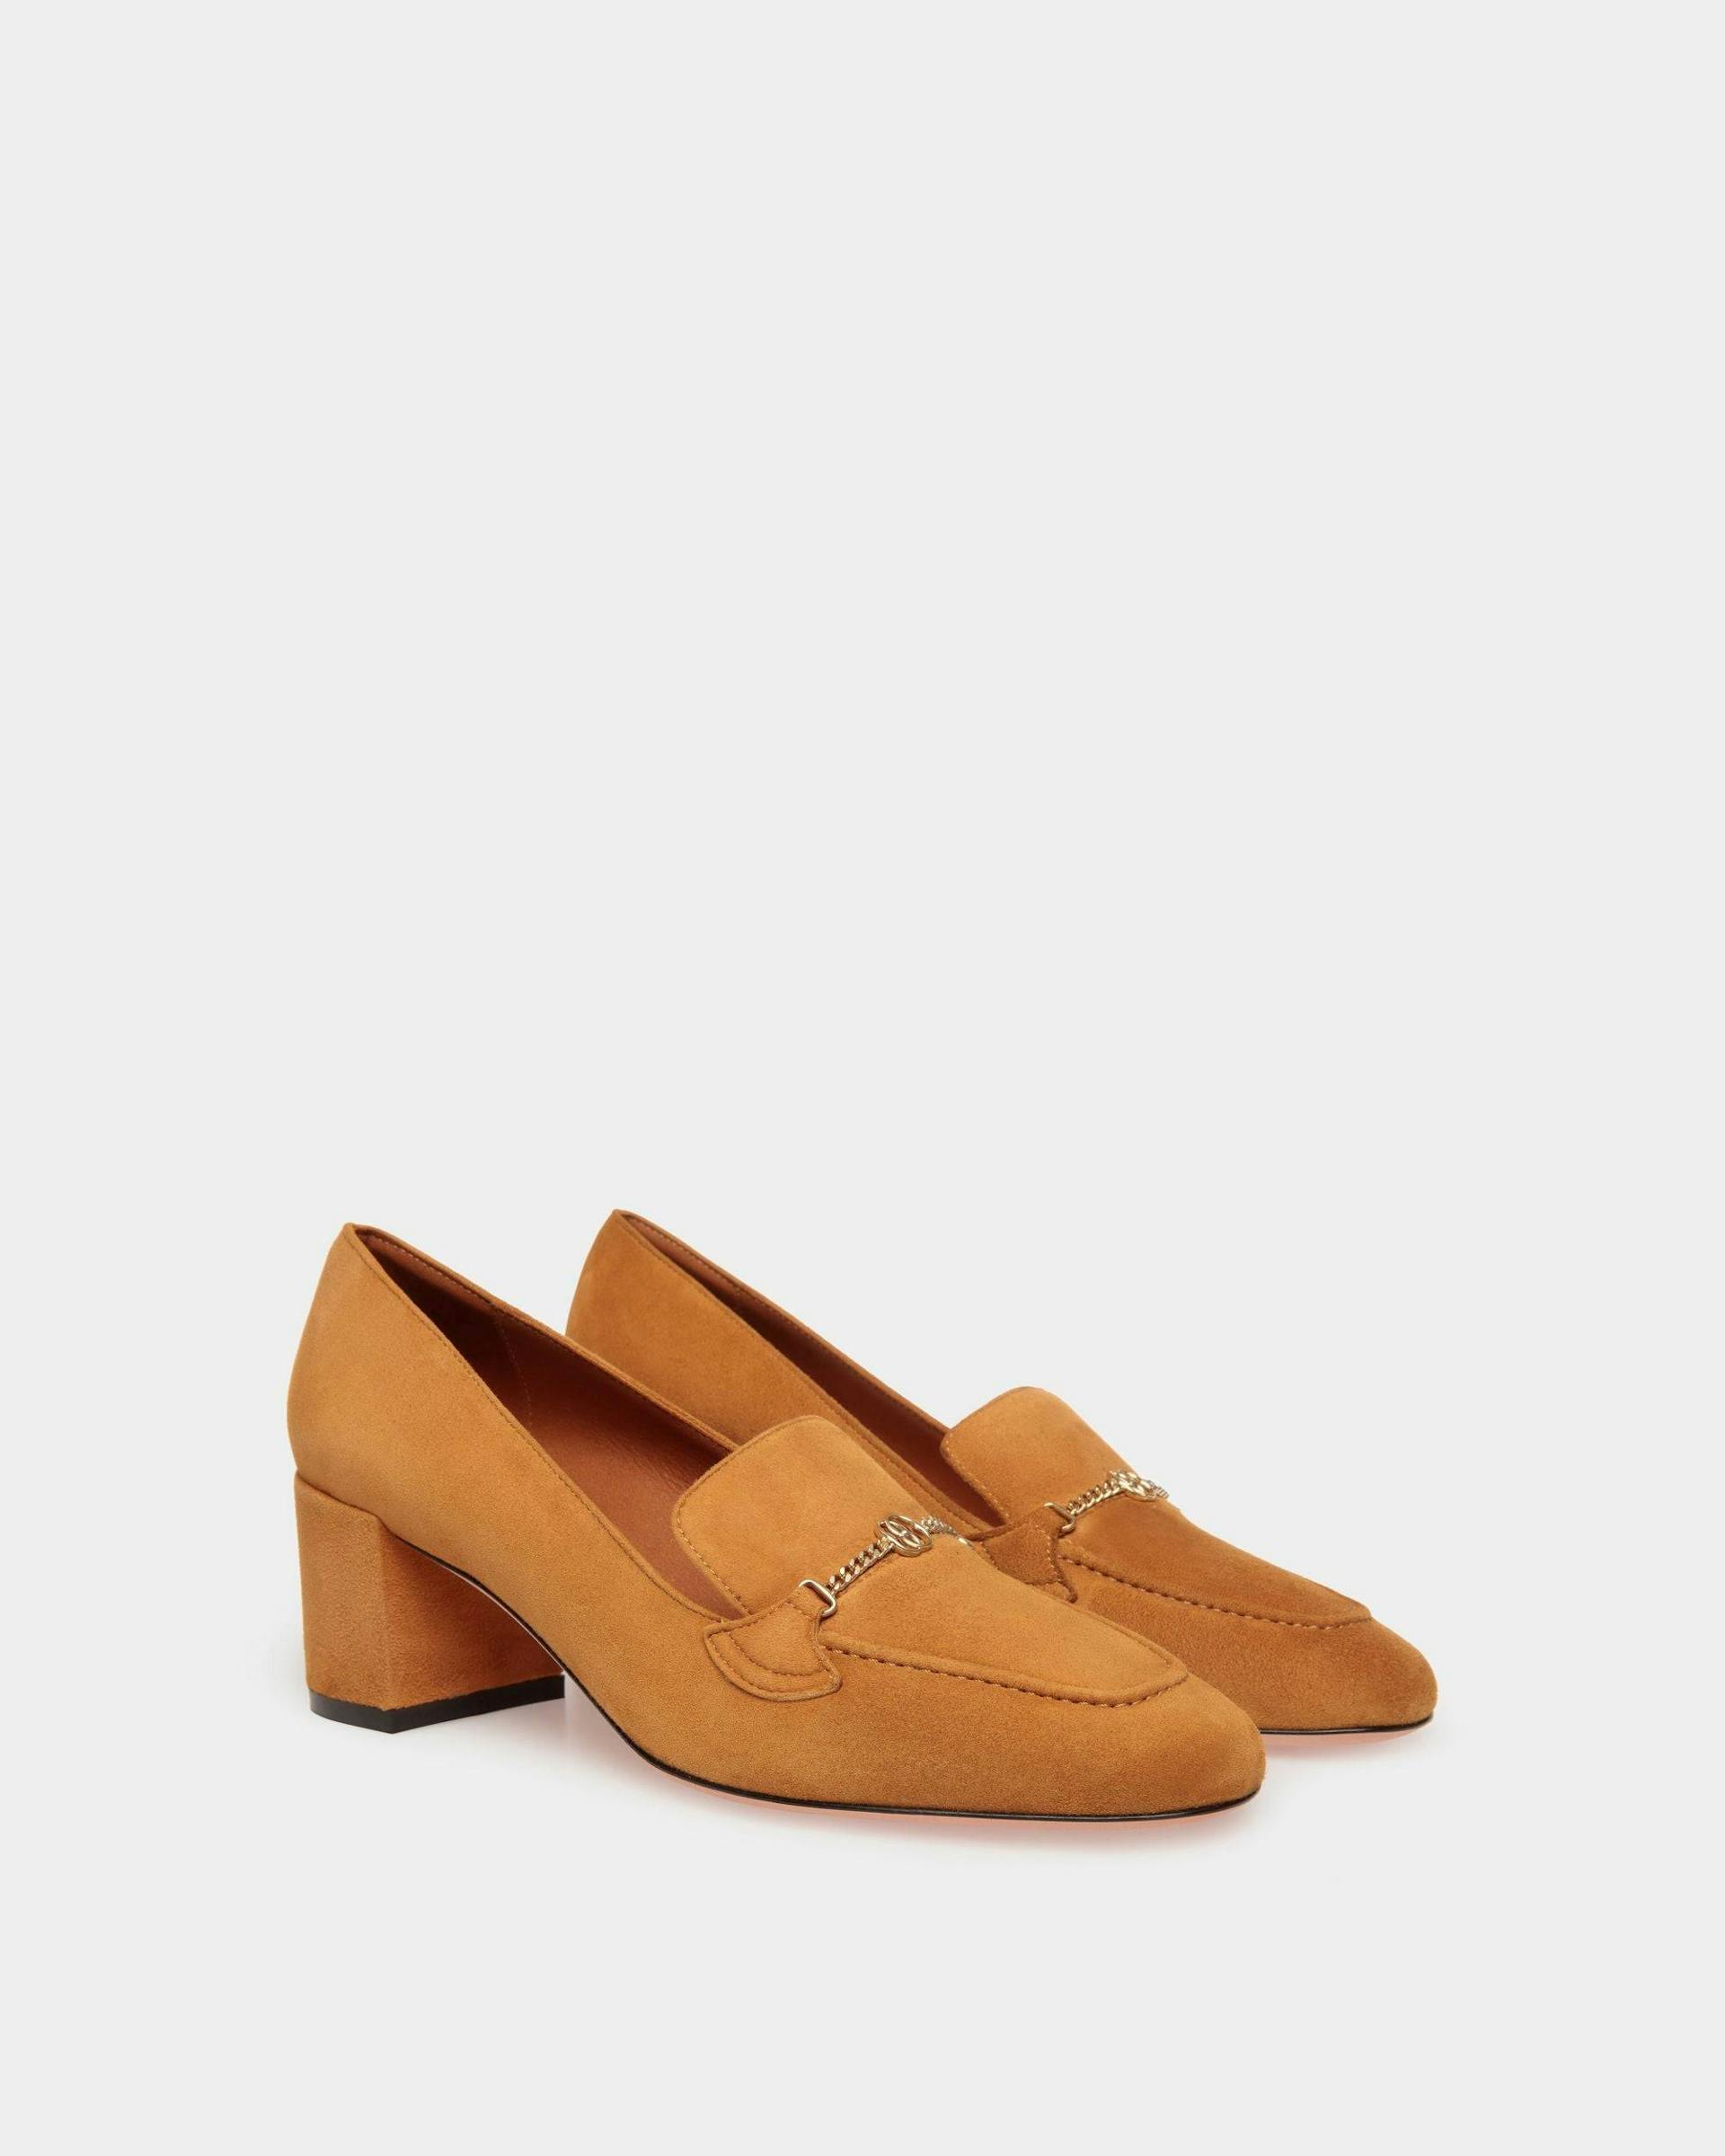 Women's Daily Emblem Pump in Brown Suede | Bally | Still Life 3/4 Front